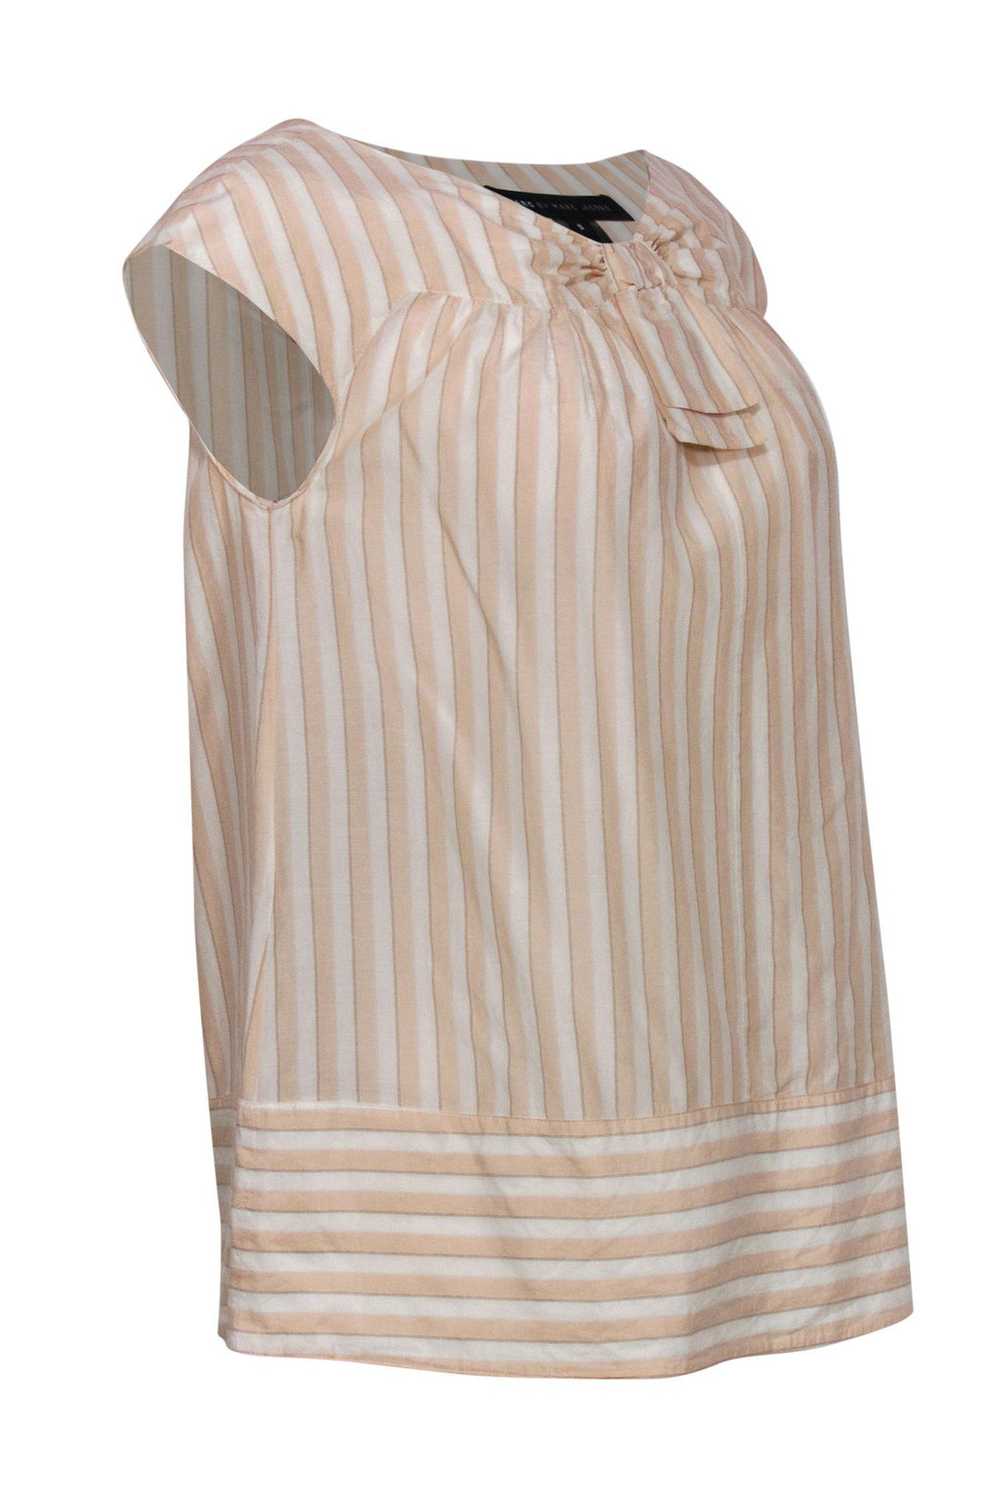 Marc by Marc Jacobs - Light Pink & White Striped … - image 2